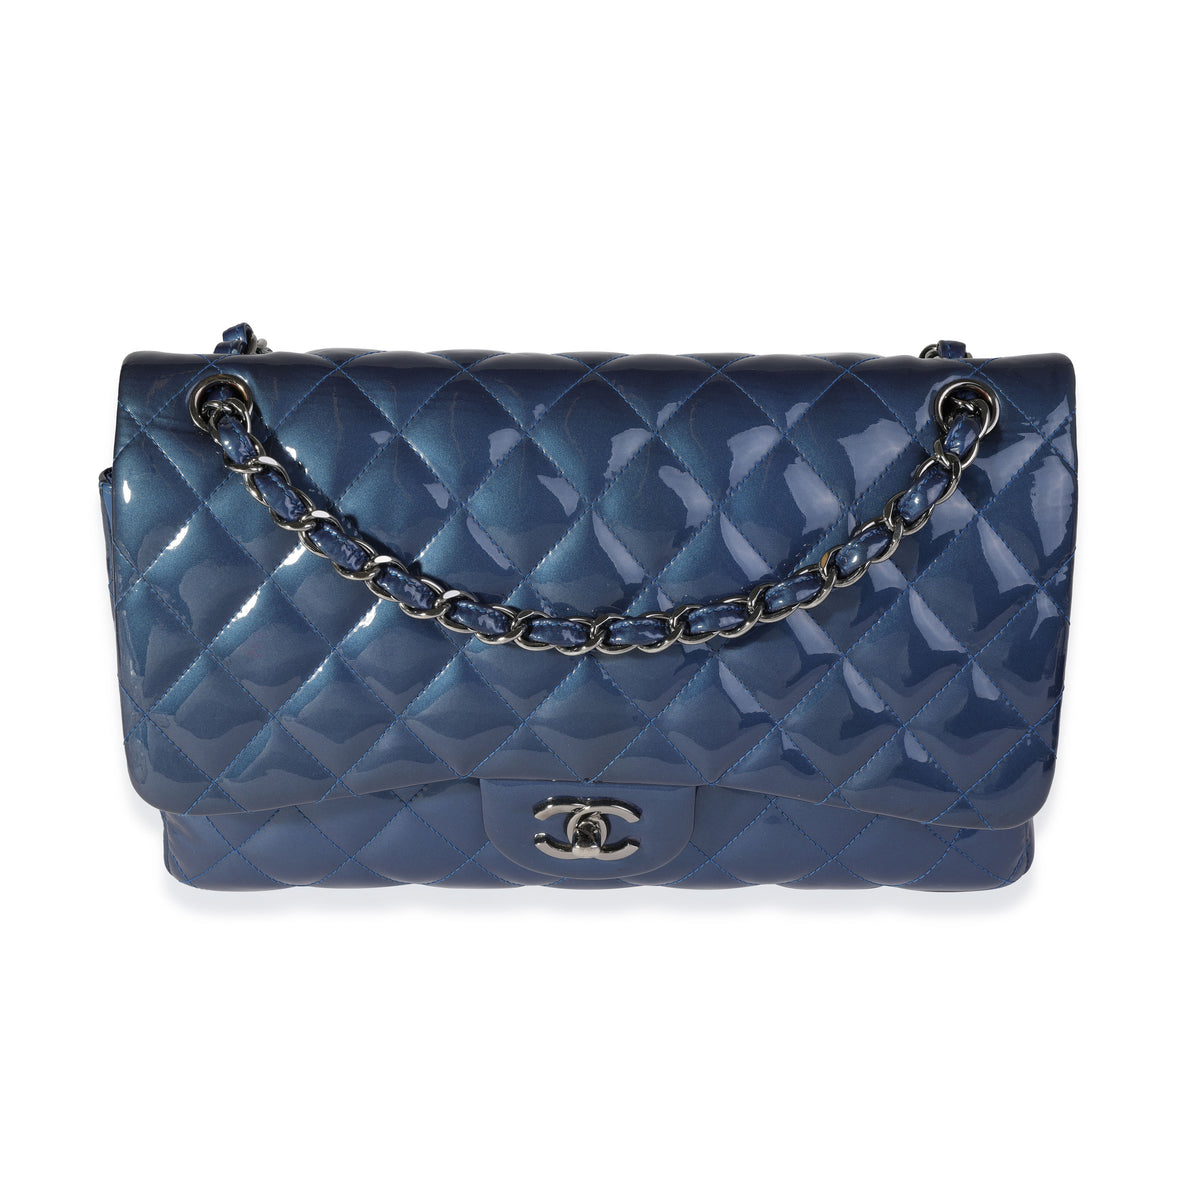 Chanel Maxi Single Flap, Patent leather, Green SHW - Laulay Luxury